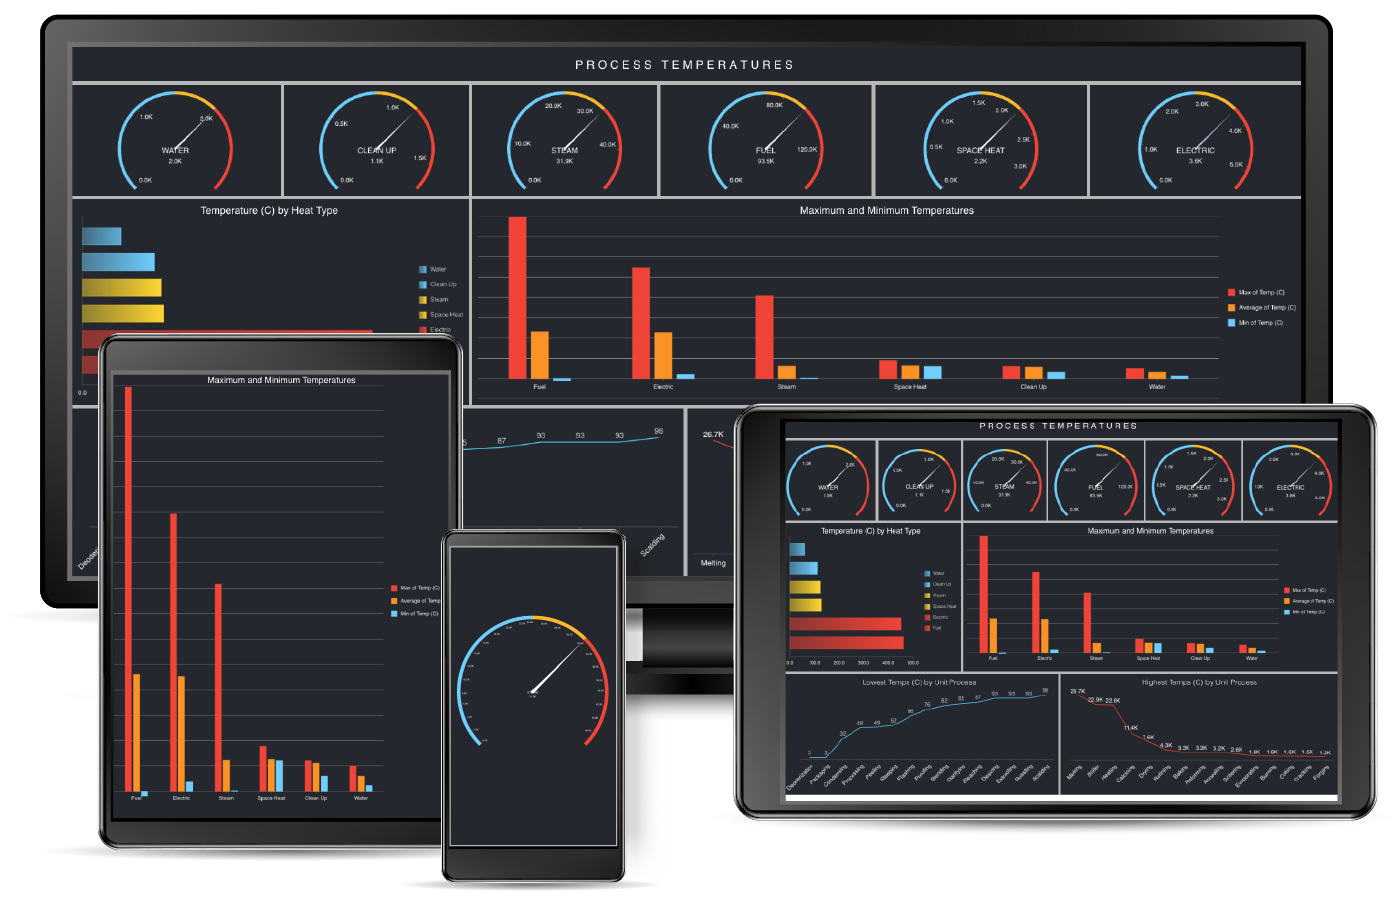 Business Intelligence Dashboard - Process Temperature Manufacturing Dashboard